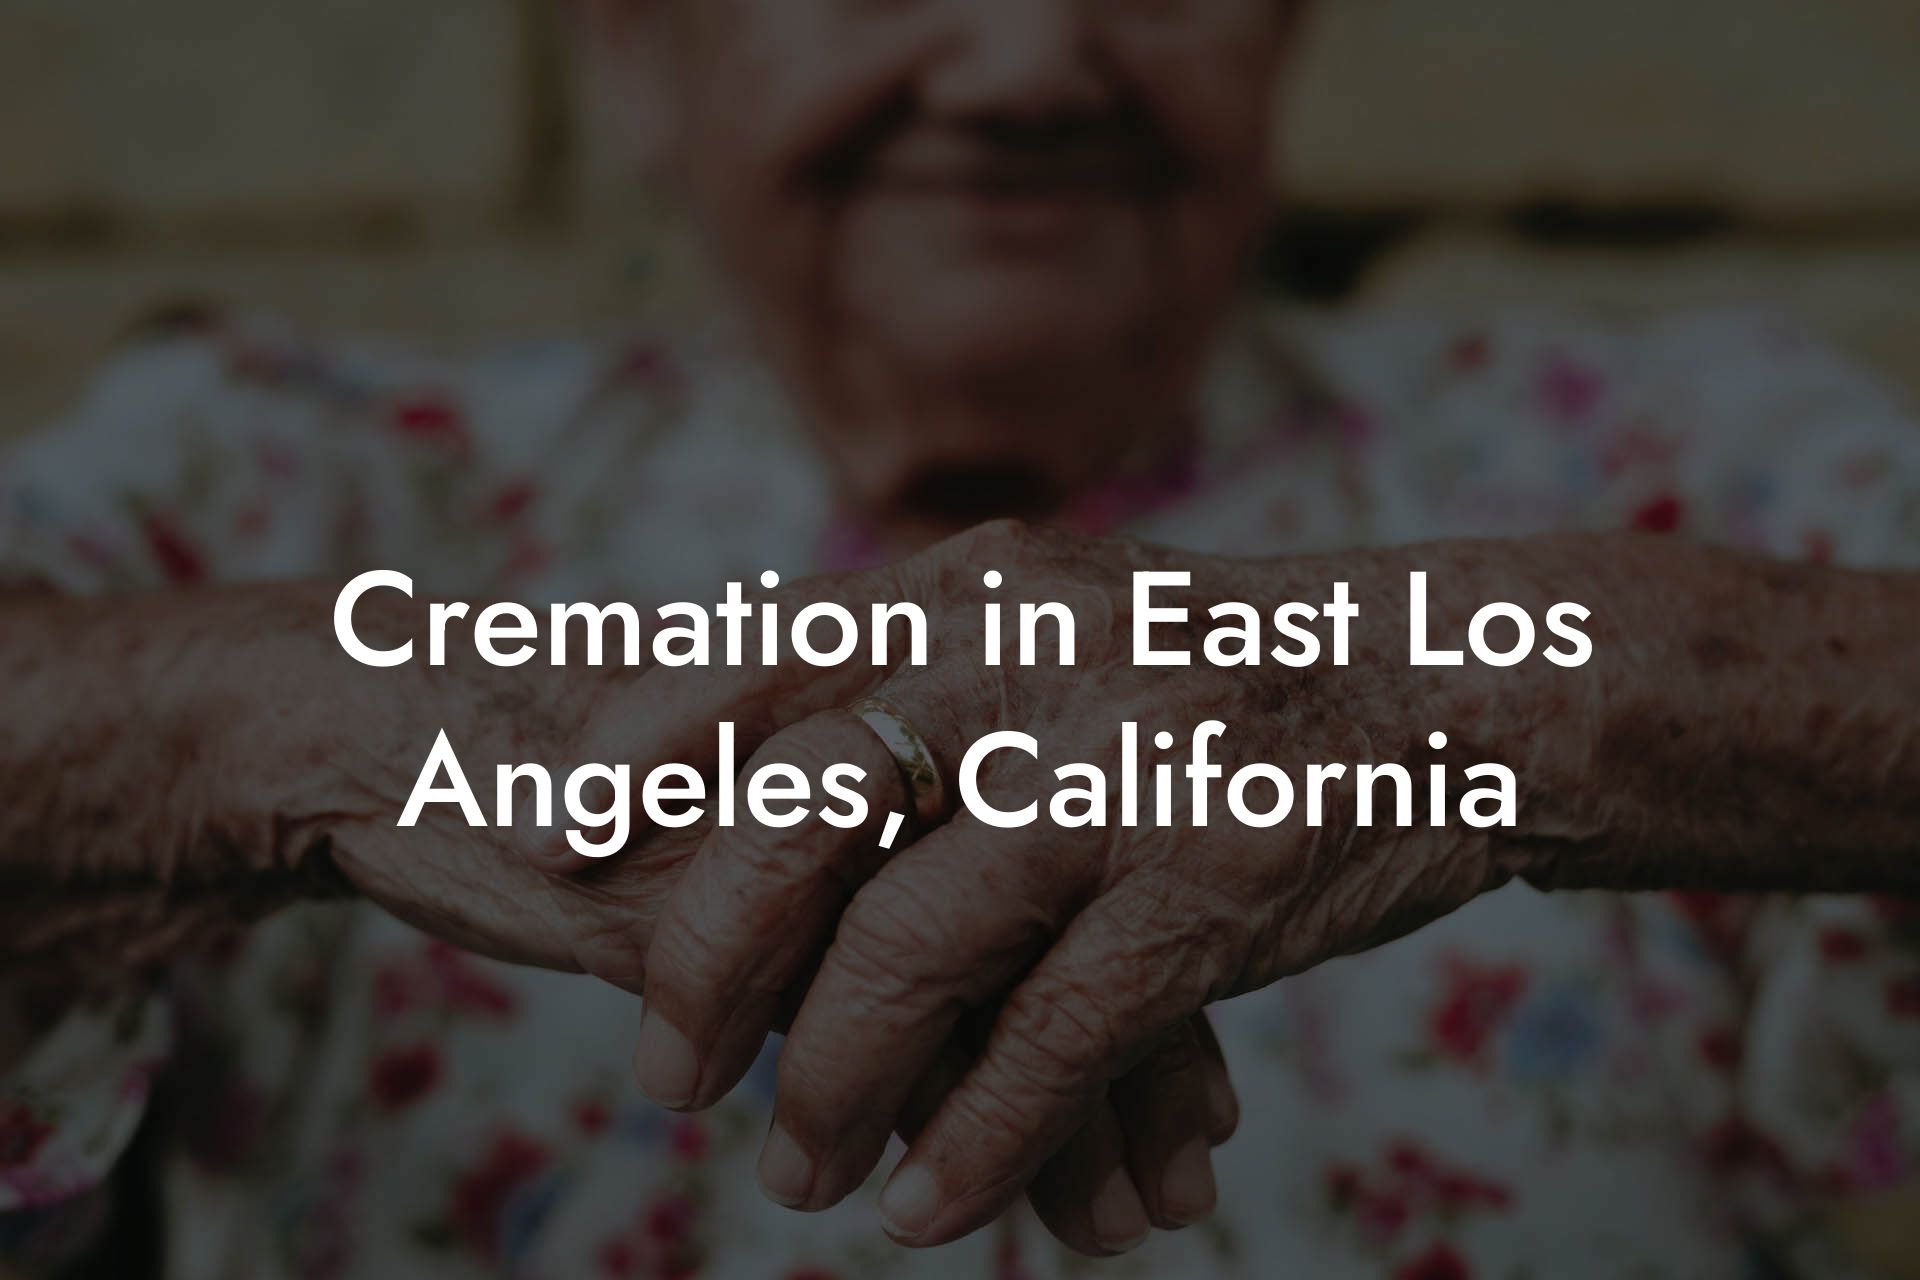 Cremation in East Los Angeles, California